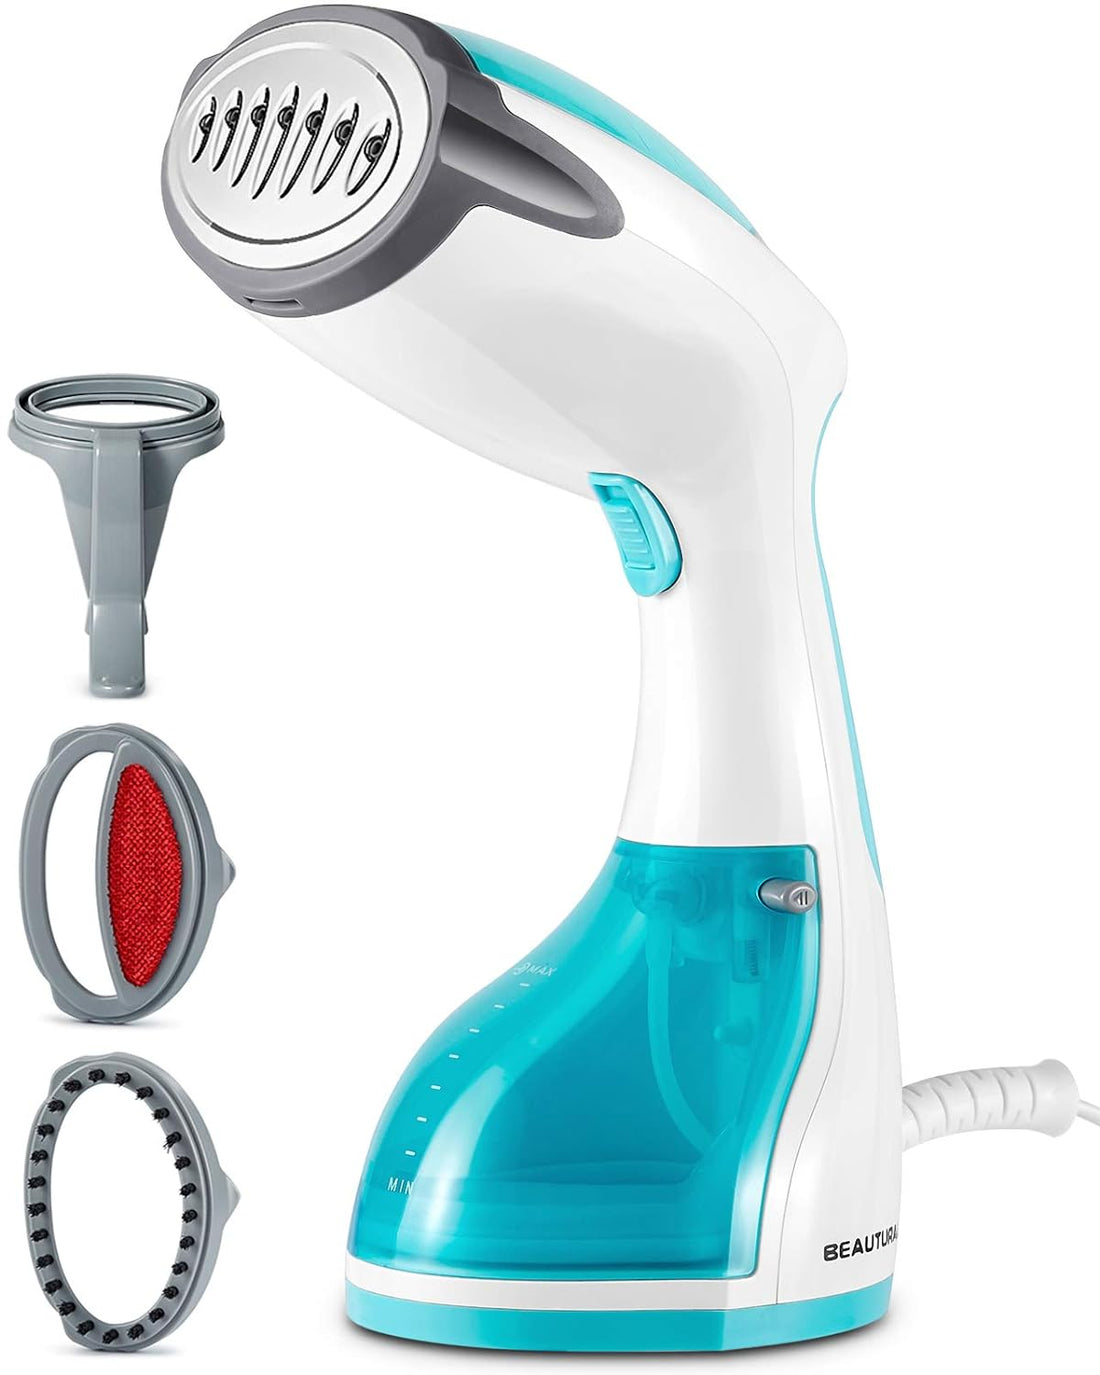 BEAUTURAL Steamer for Clothes, Portable Handheld Garment Fabric Wrinkles Remover, 30-Second Fast Heat-up, Auto-Off, Large Detachable Water Tank (220V)